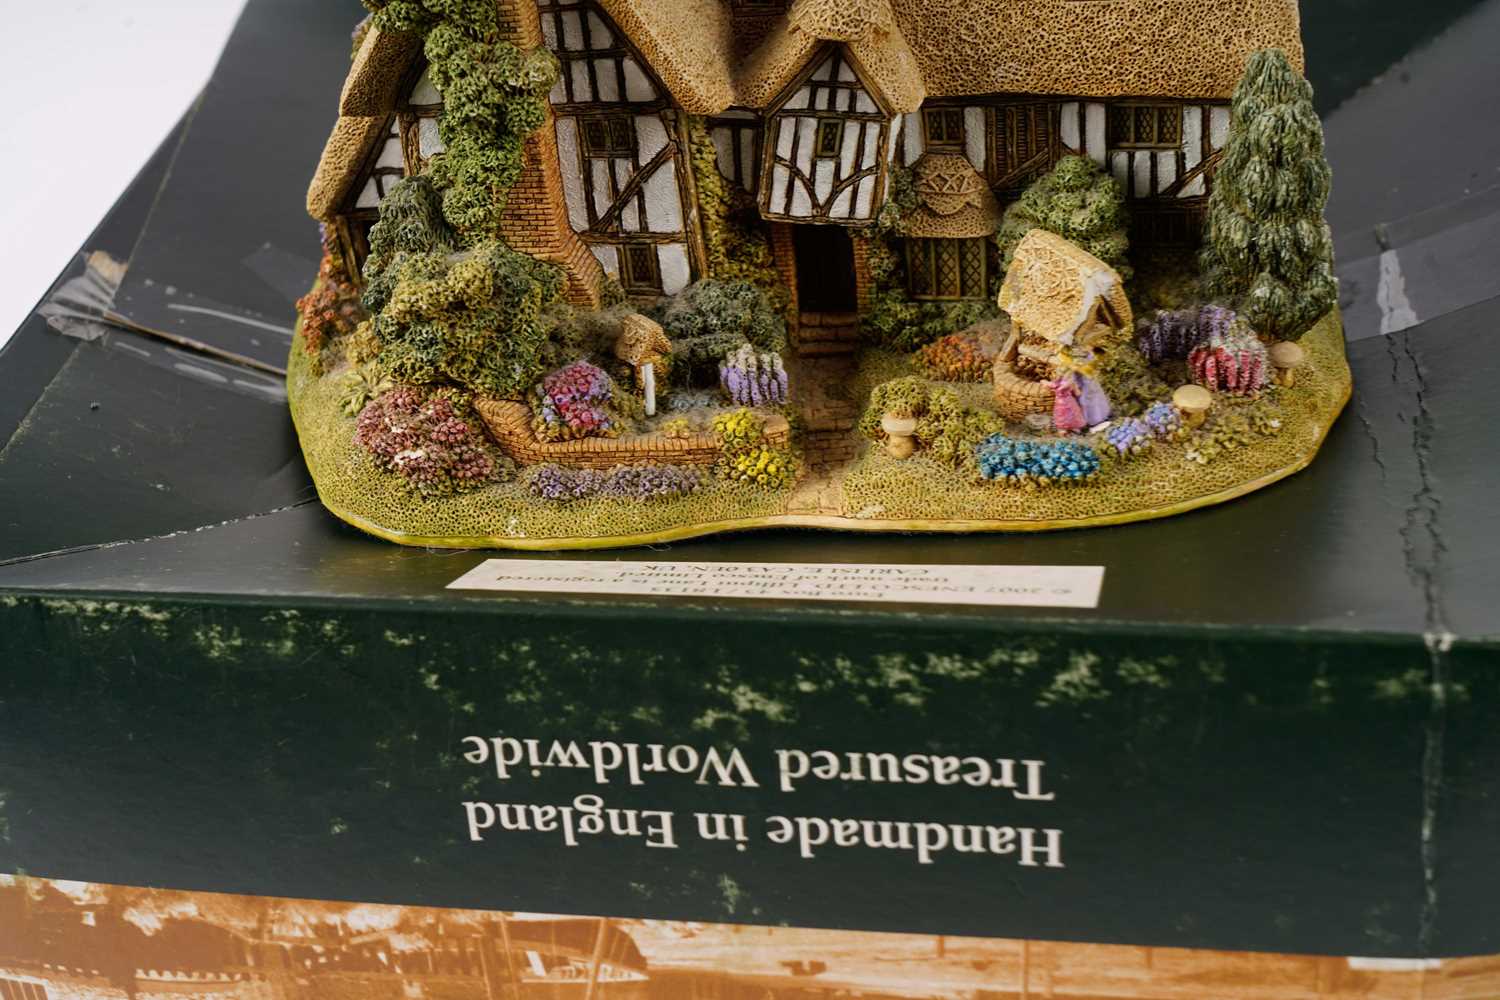 Two lilliput lane cottages - Image 3 of 10